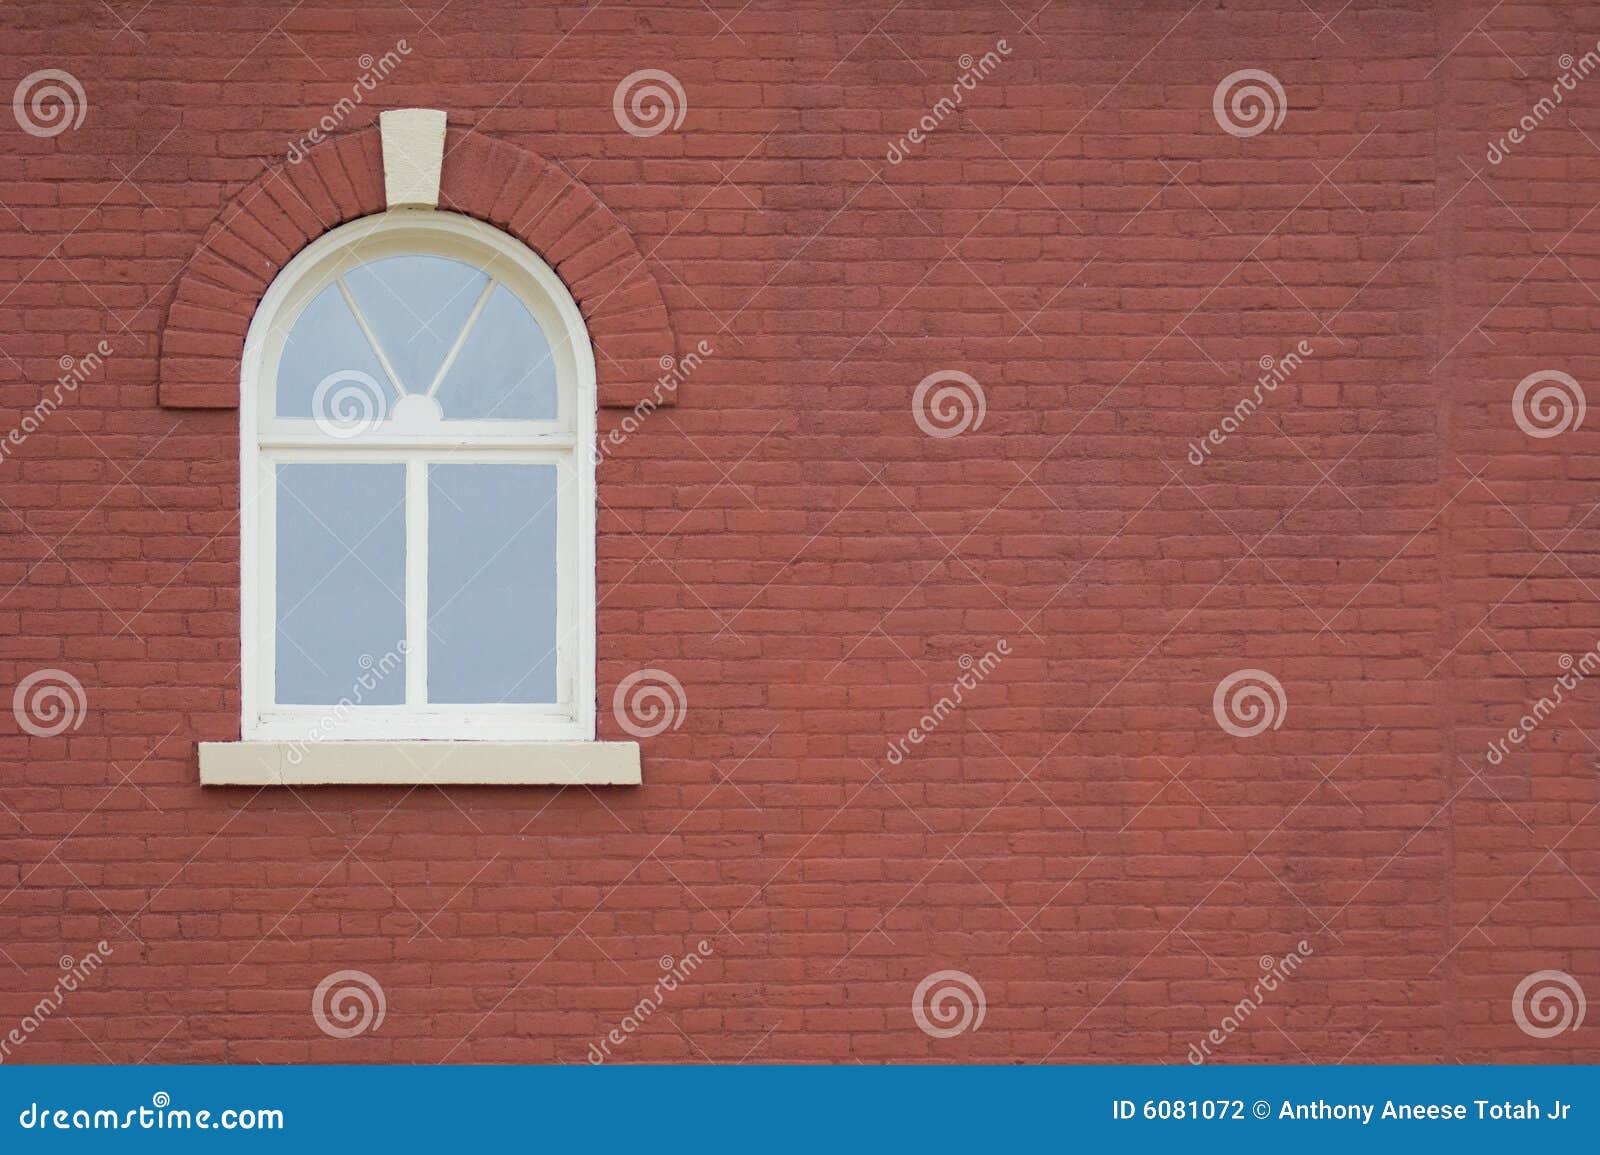 32,766 White Window Red Brick Wall Images, Stock Photos, 3D objects, &  Vectors